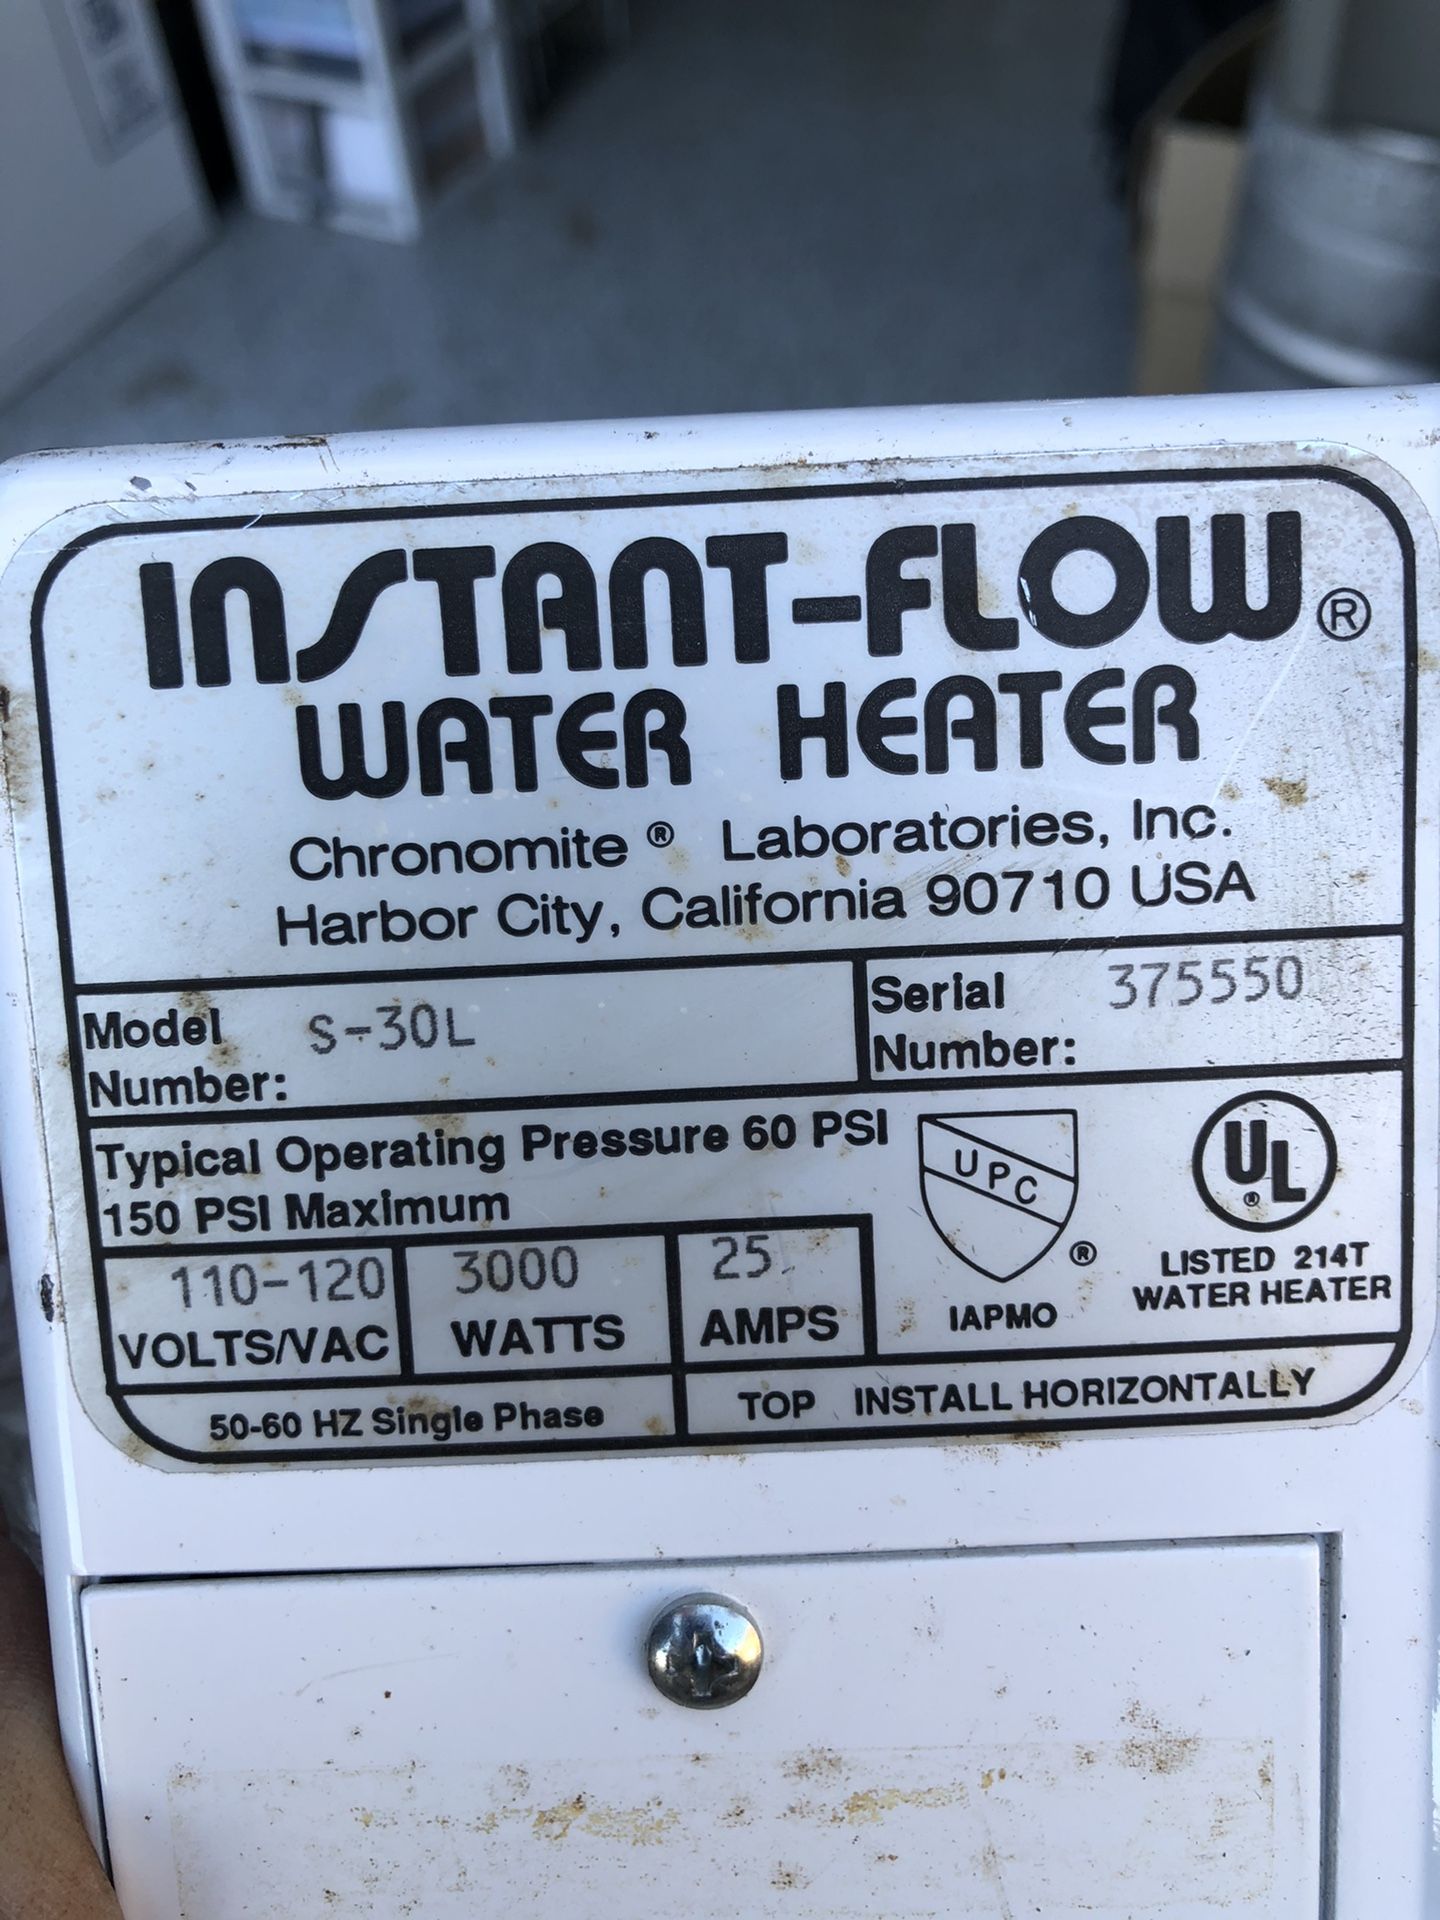 INSTANT HOT WATER HEATER